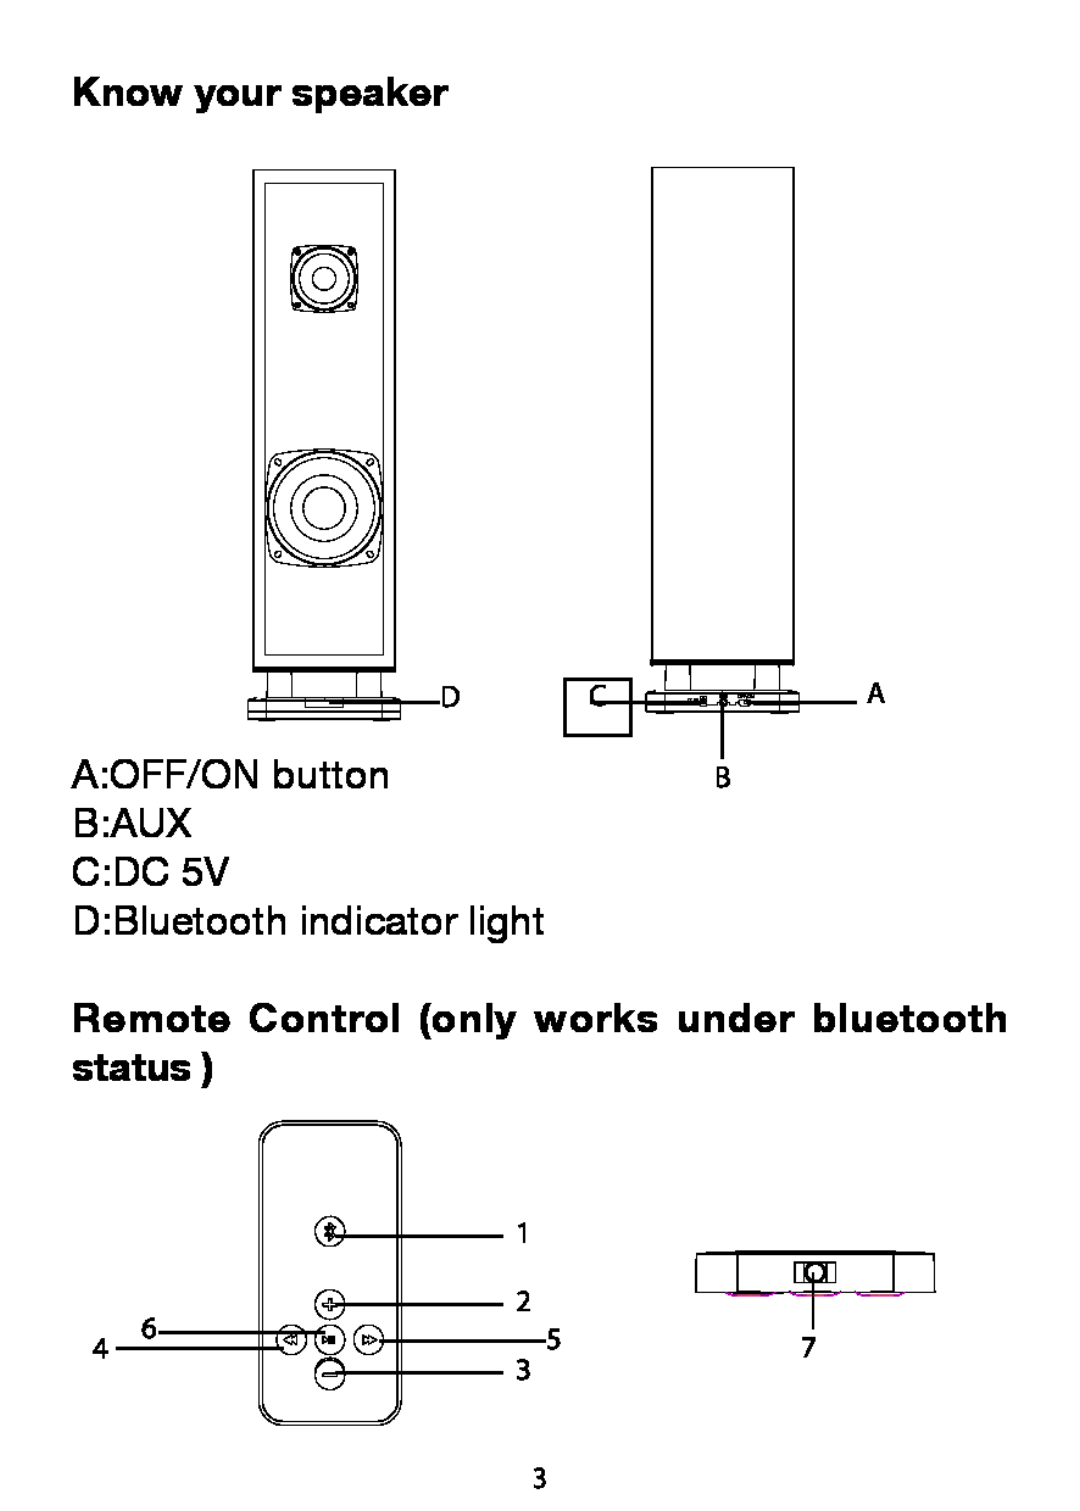 Sylvania SP269 manual Know your speaker, Remote Control only works under bluetooth status, A OFF/ON button B AUX C DC 